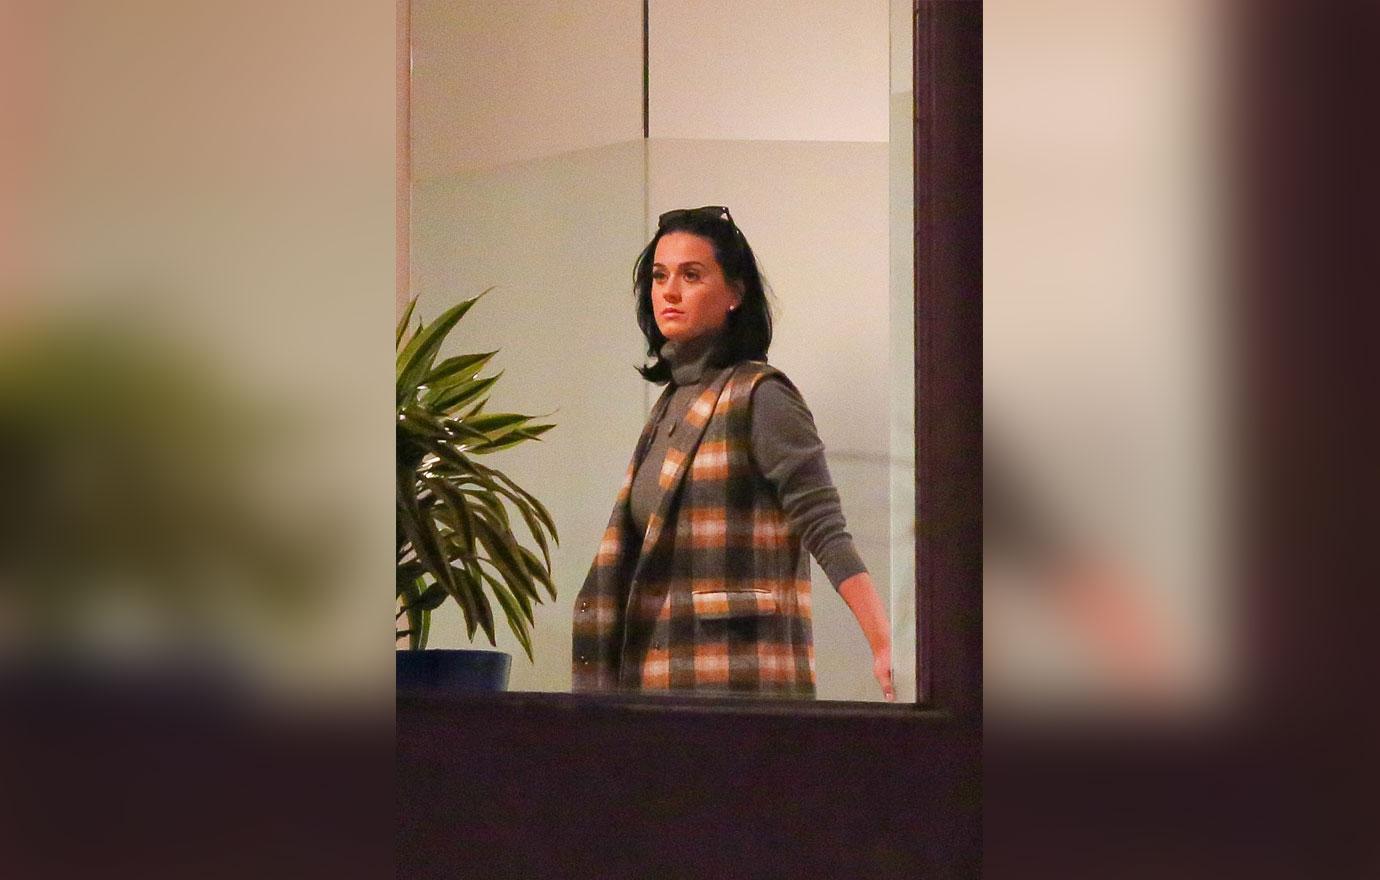 Katy Perry and The Weeknd Spotted at Dinner Together in West